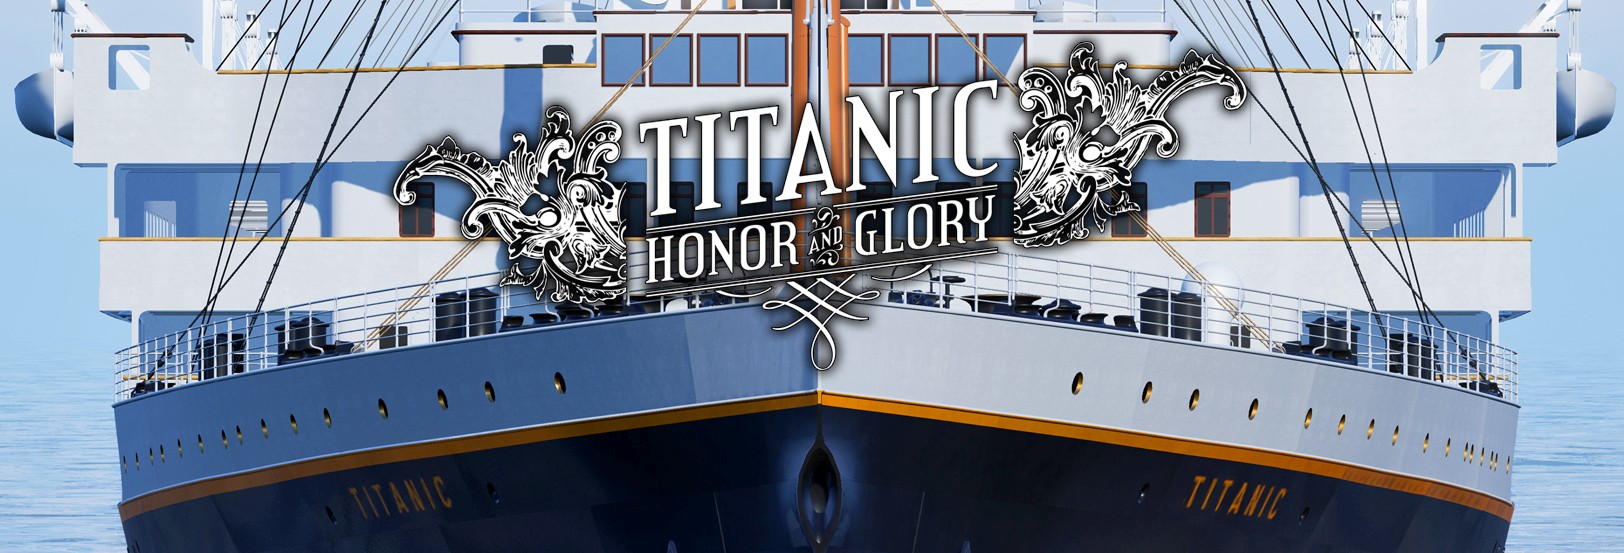 titanic honor and glory download